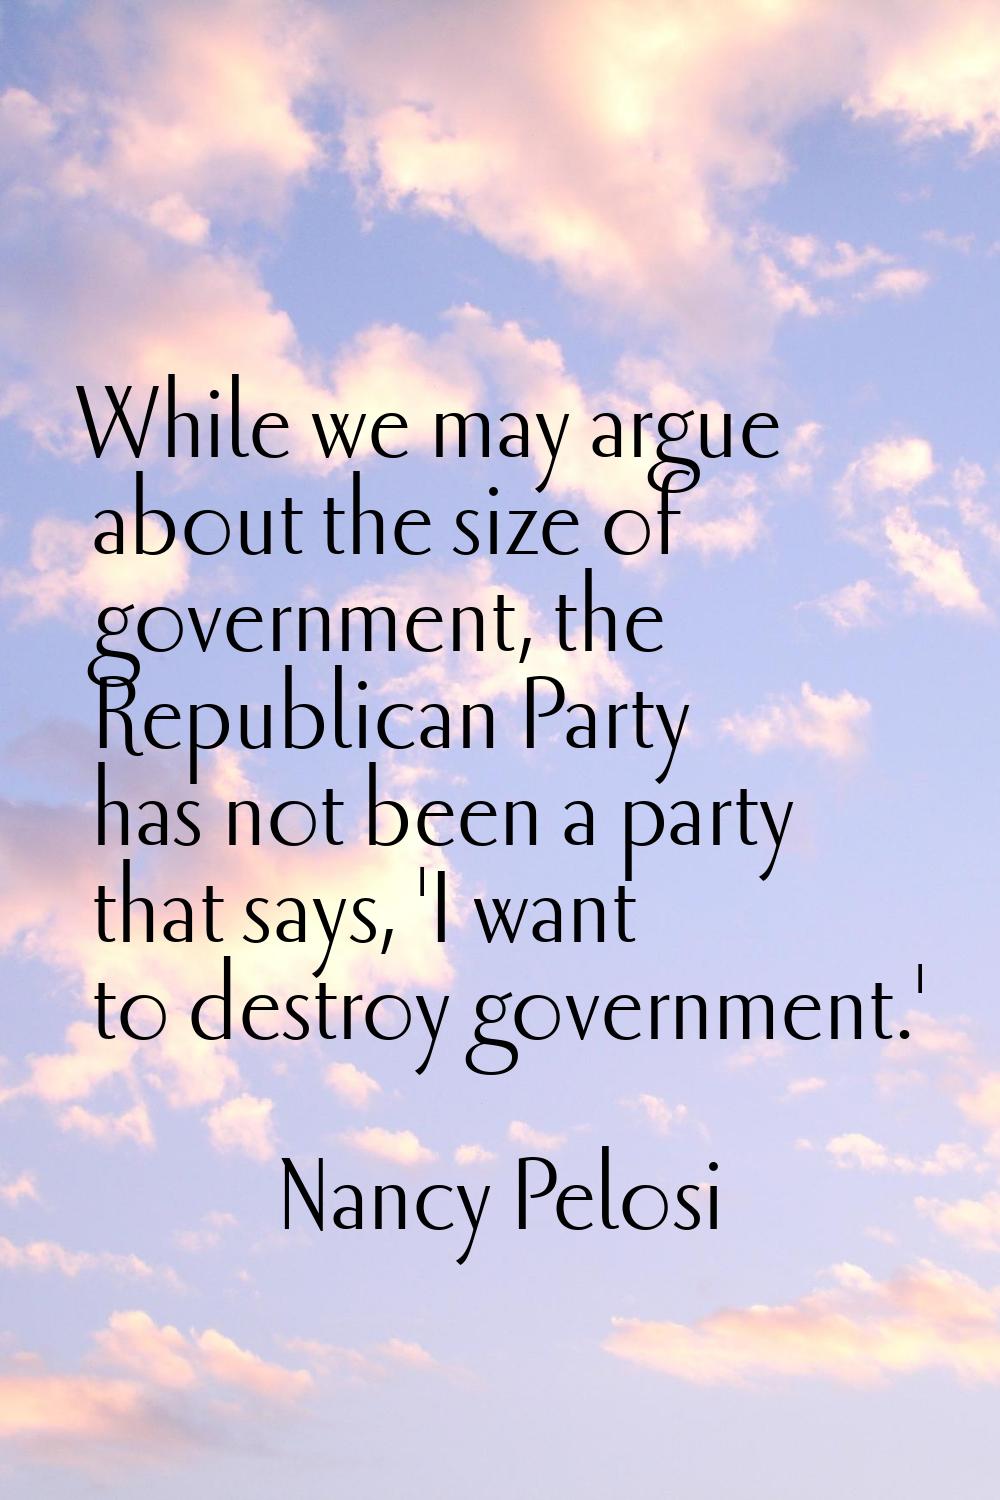 While we may argue about the size of government, the Republican Party has not been a party that say